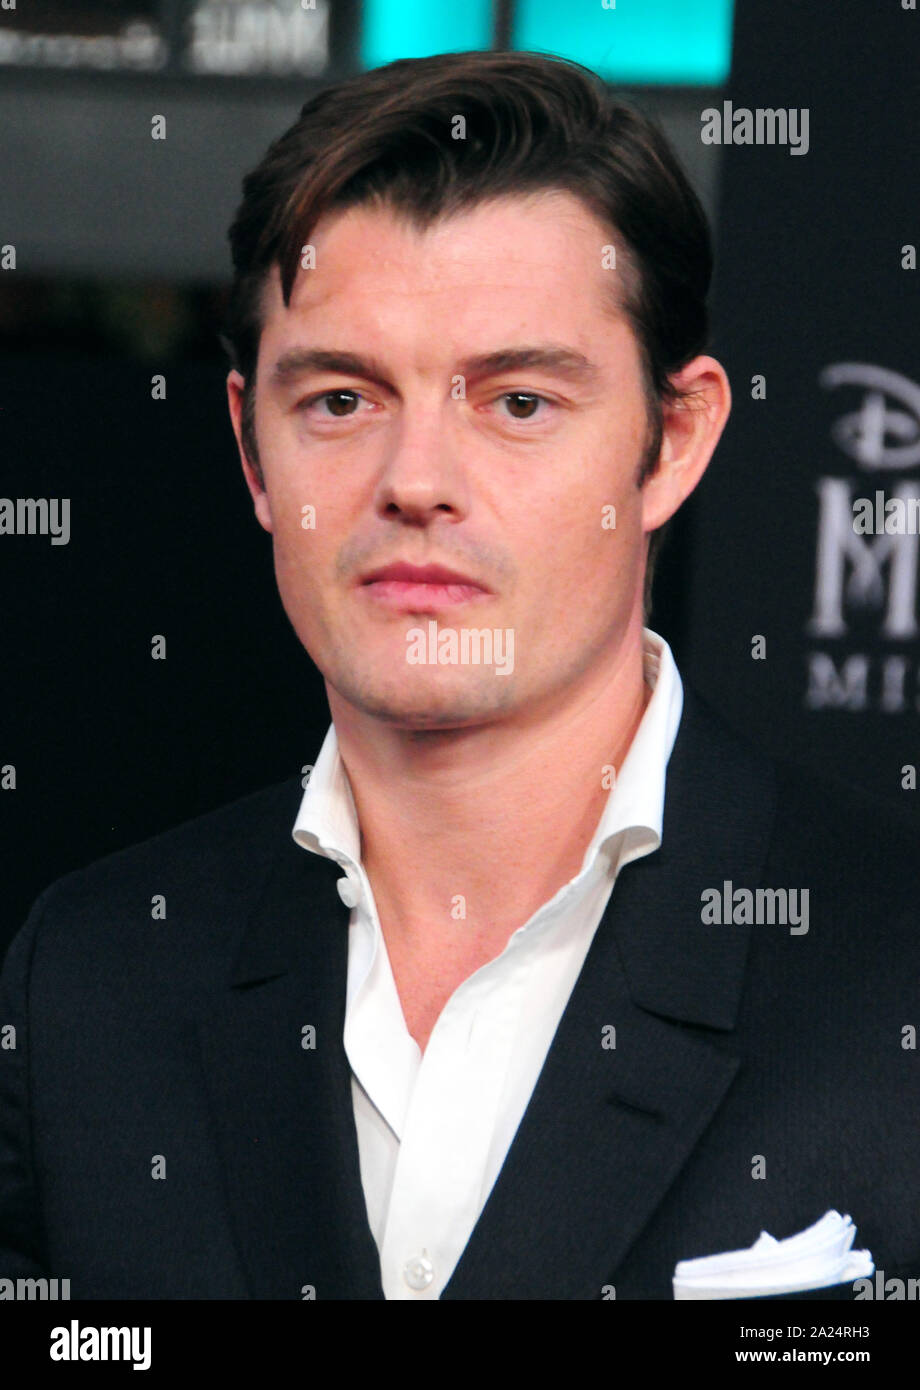 Hollywood, California, USA 30th September 2019 Actor Sam Riley attends the World Premiere of Disney's 'Maleficent: Mistress of Evil' on September 30, 2019 at the El Capitan Theatre in Hollywood, California, USA. Photo by Barry King/Alamy Live News Stock Photo